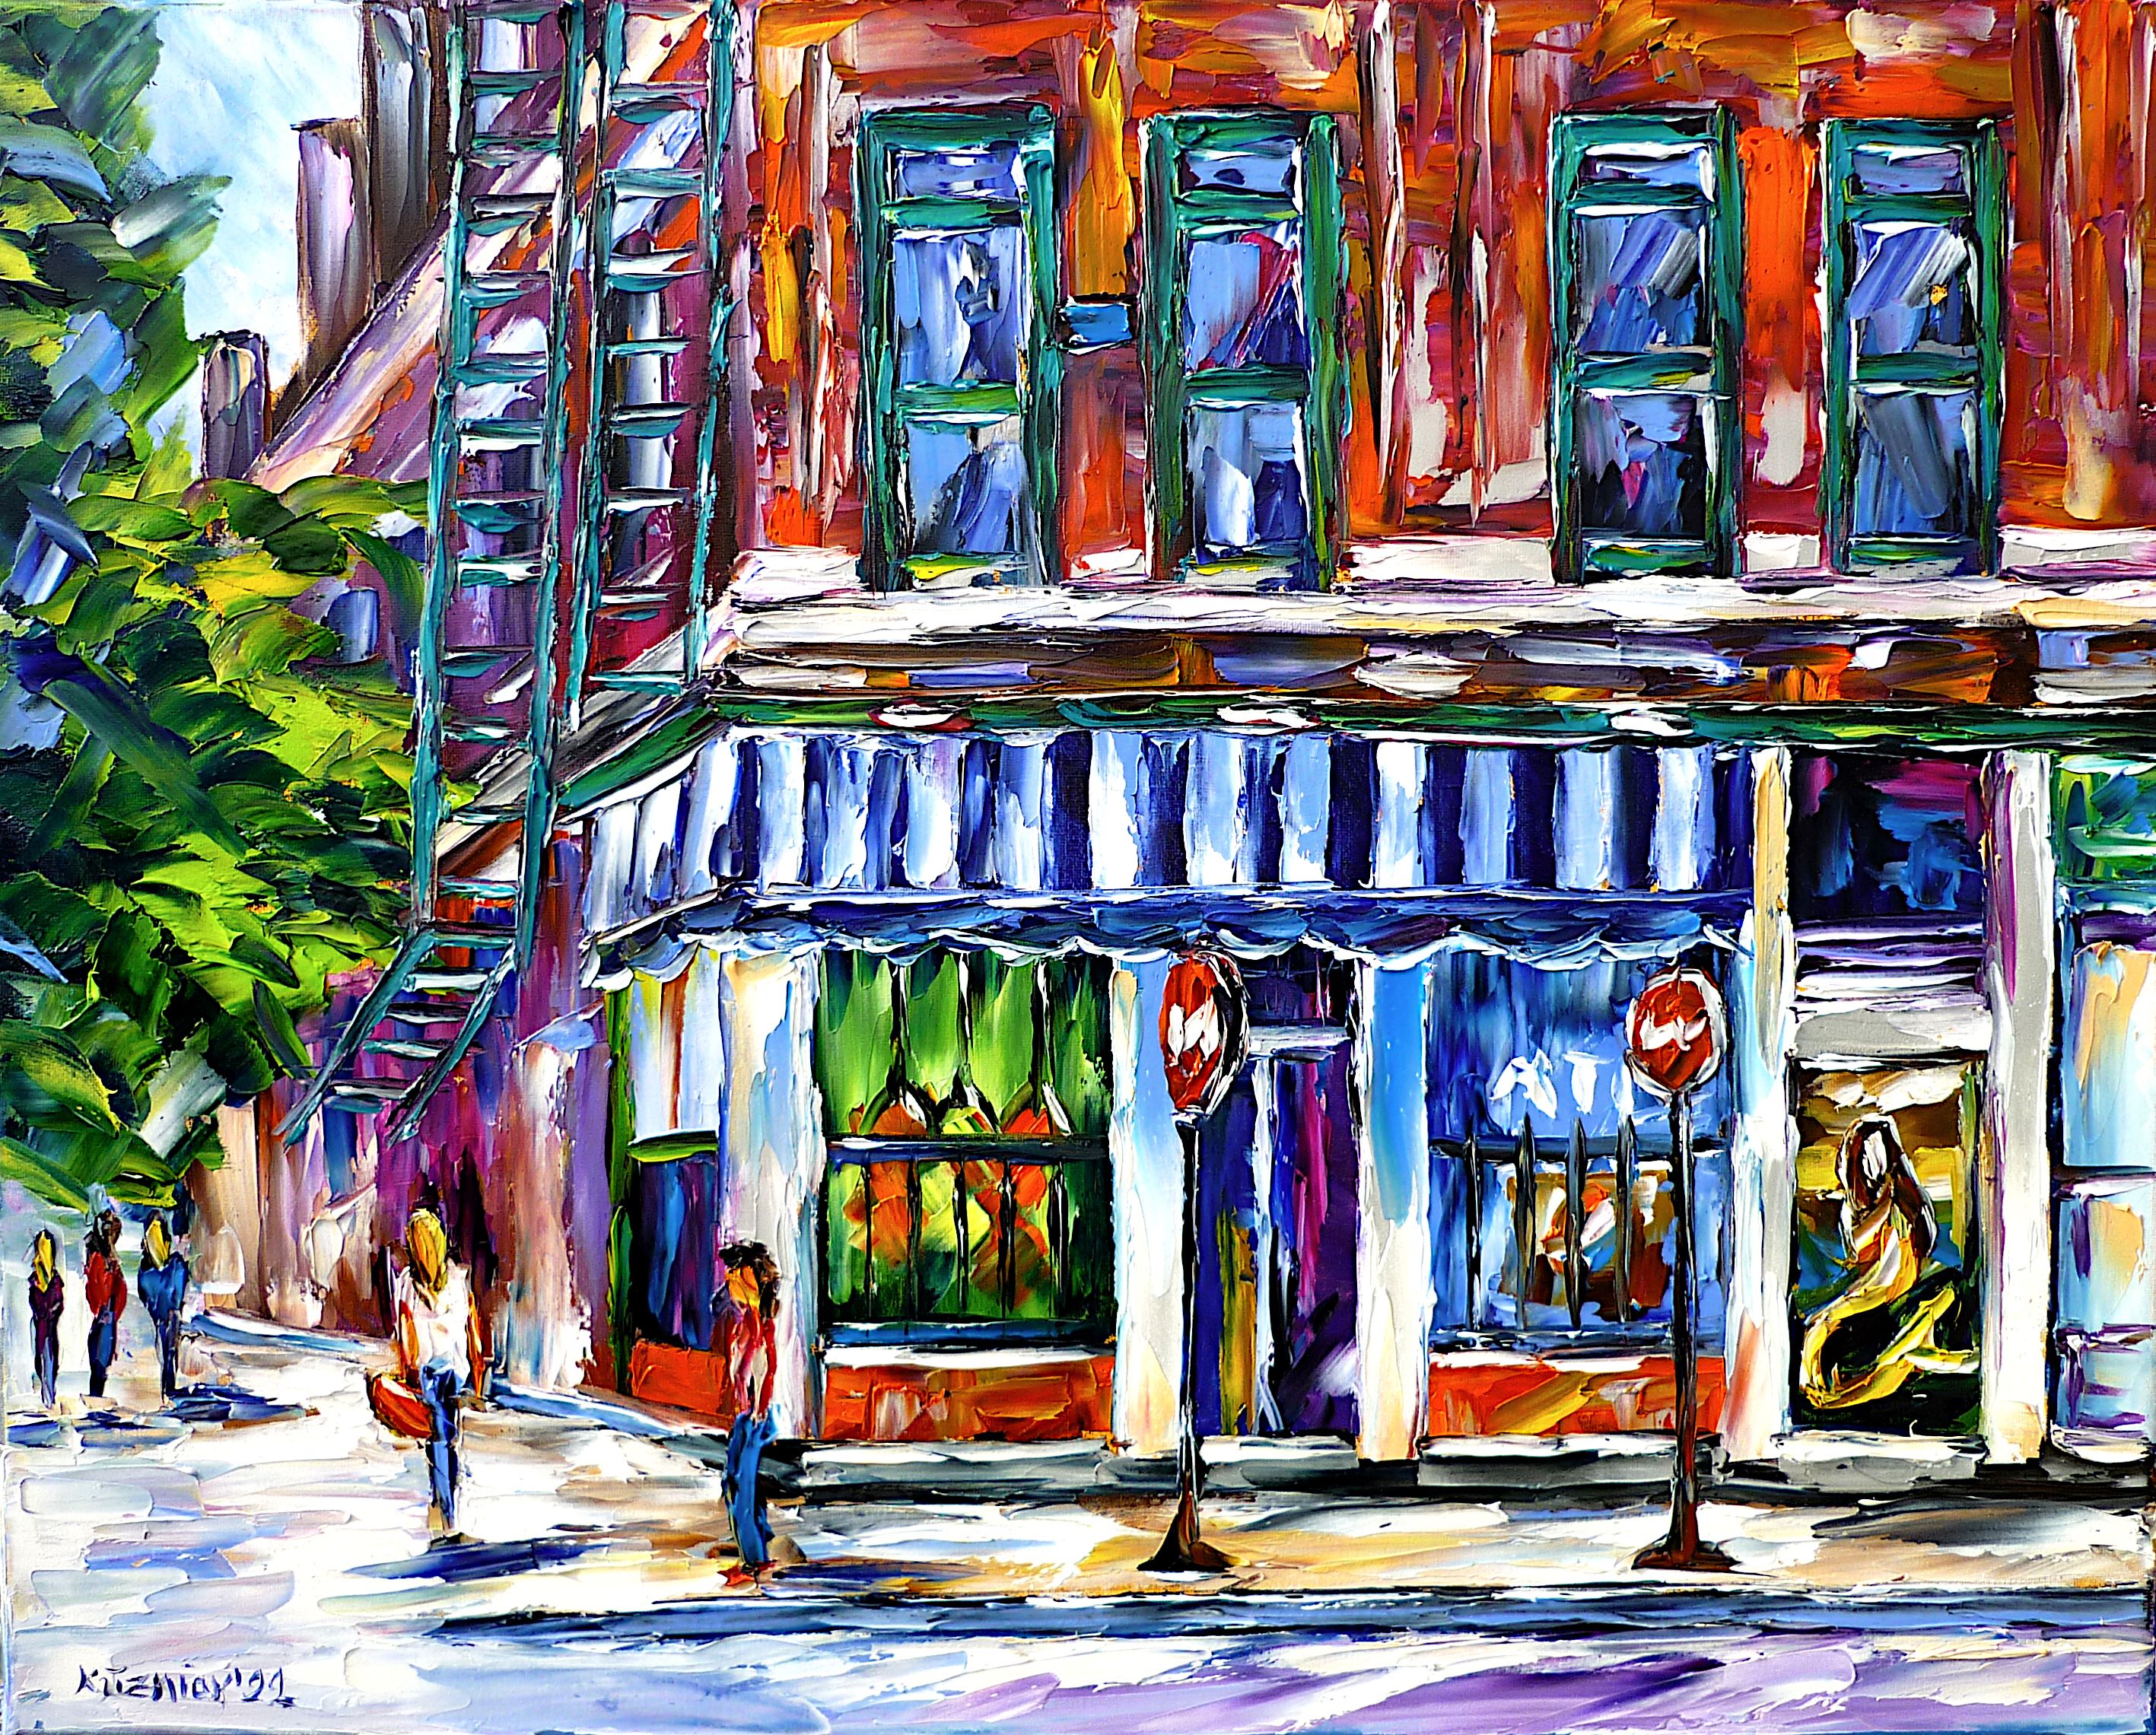 chicago city scene,streets of chicago,chicago cityscape,chicago streetscape,yaya's mini mart,building fire escape,city pedestrian,city people,chicago people,chicago oil painting,chicago supermarket,shopping,city walk,city stroll,strolling people,people on street,beautiful chicago,old chicago,chicago love,chicago lovers,i love chicago,chicago beauty,chicago alive,chicago life,chicago colorful,city life,chicago abstract,palette knife oil painting,modern art,impressionism,expressionism,abstract painting,lively colors,colorful painting,bright colors,light reflections,impasto painting,figurative